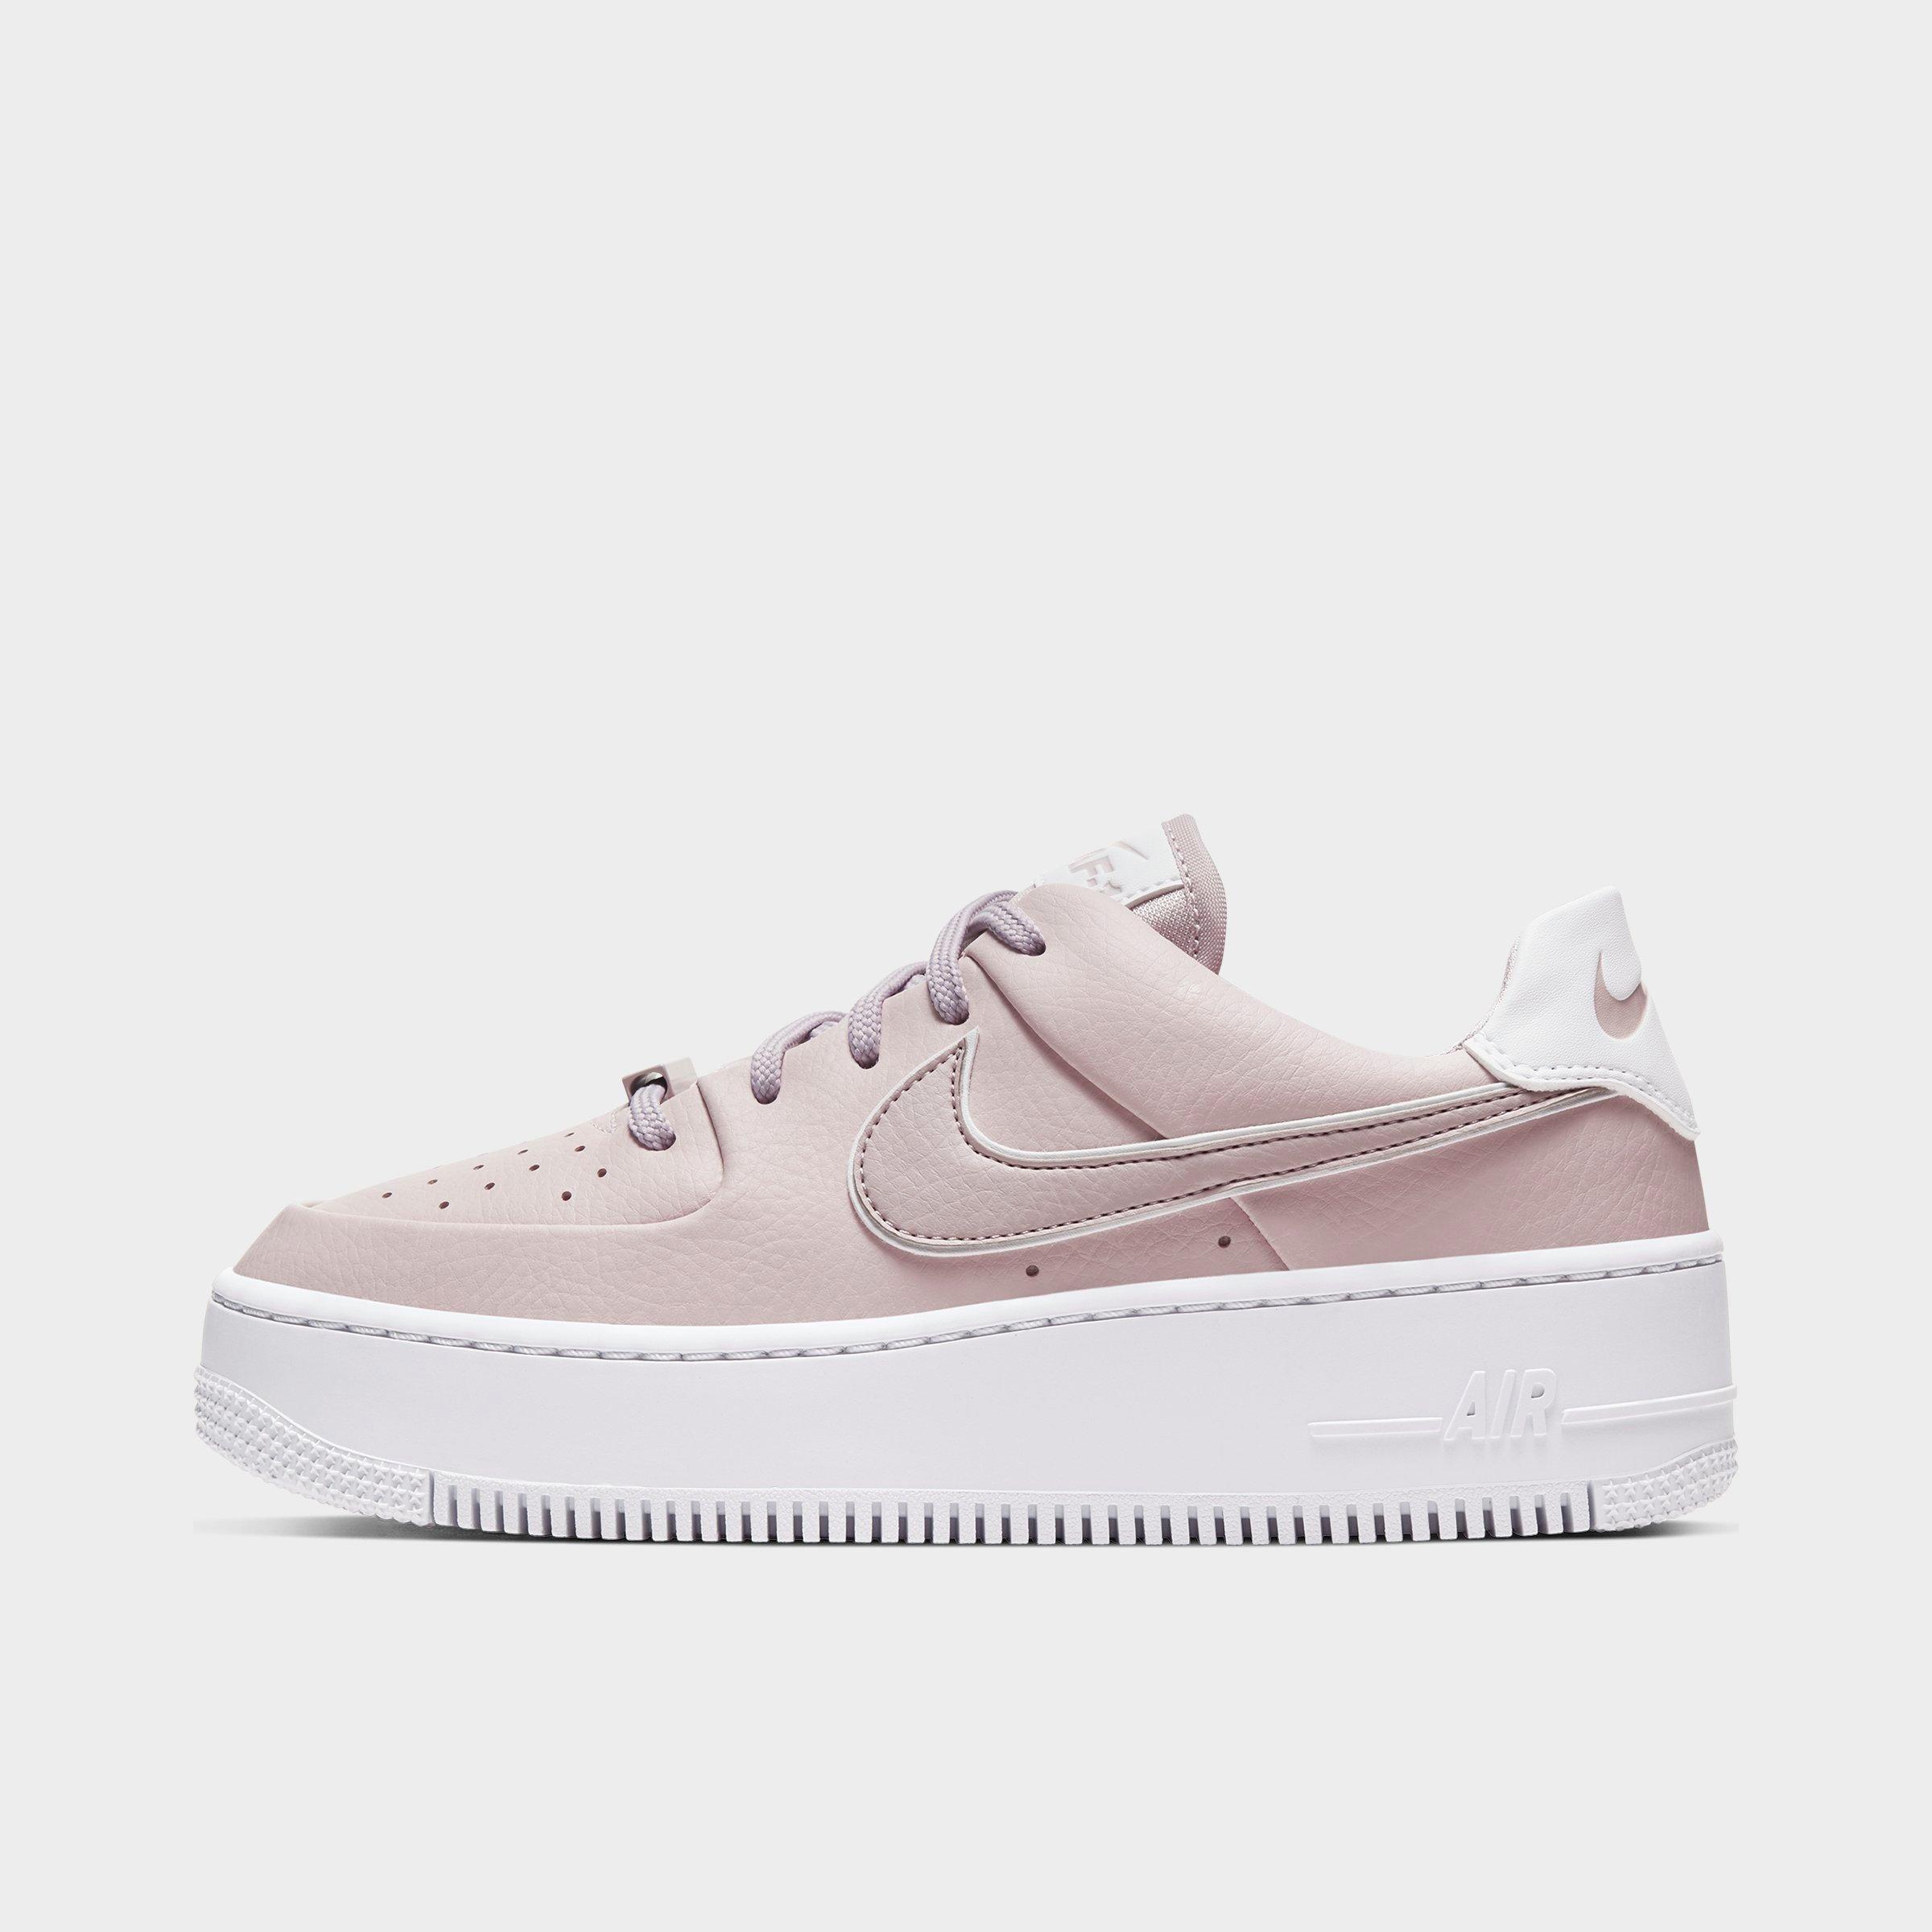 womens nike air force 1 size 7.5